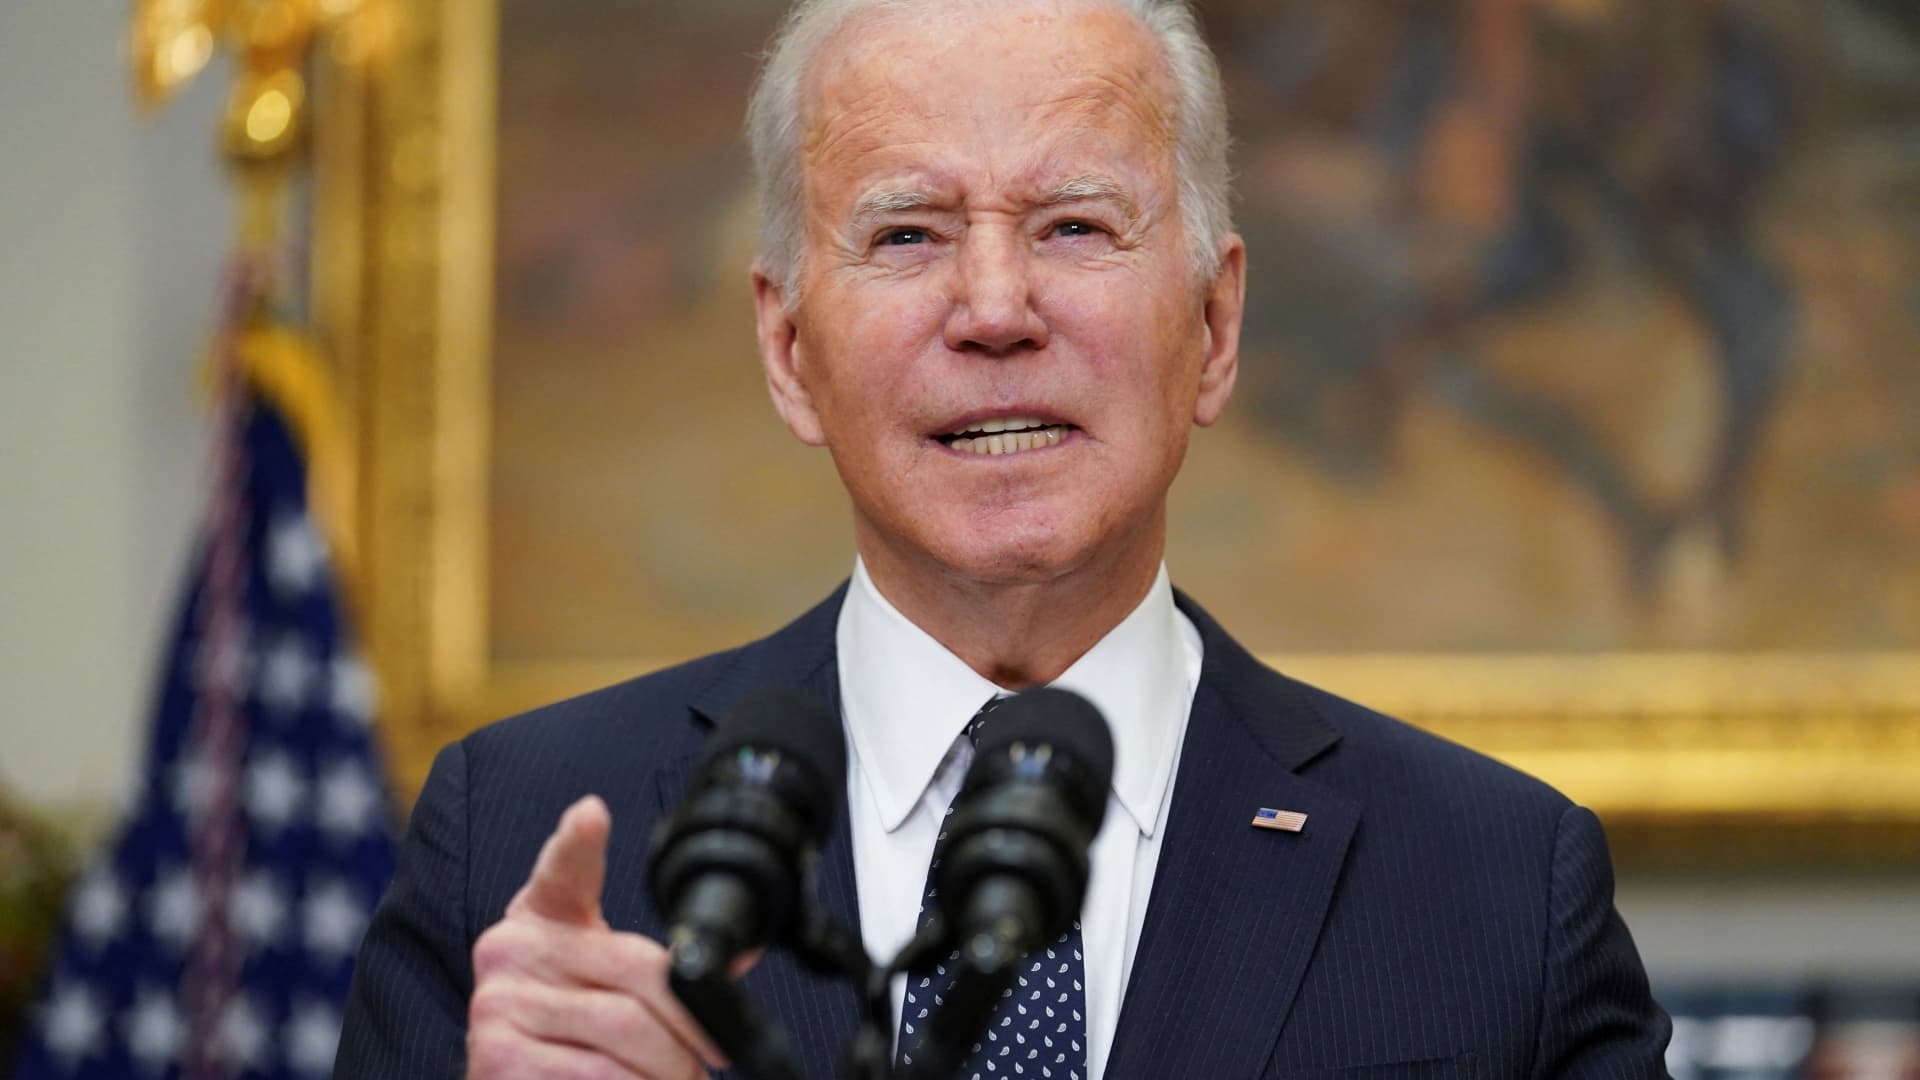 U.S. President Joe Biden delivers remarks on his administration's efforts to pursue deterrence and diplomacy in response to Russia’s military buildup on the border of Ukraine, from the White House in Washington, February 18, 2022.